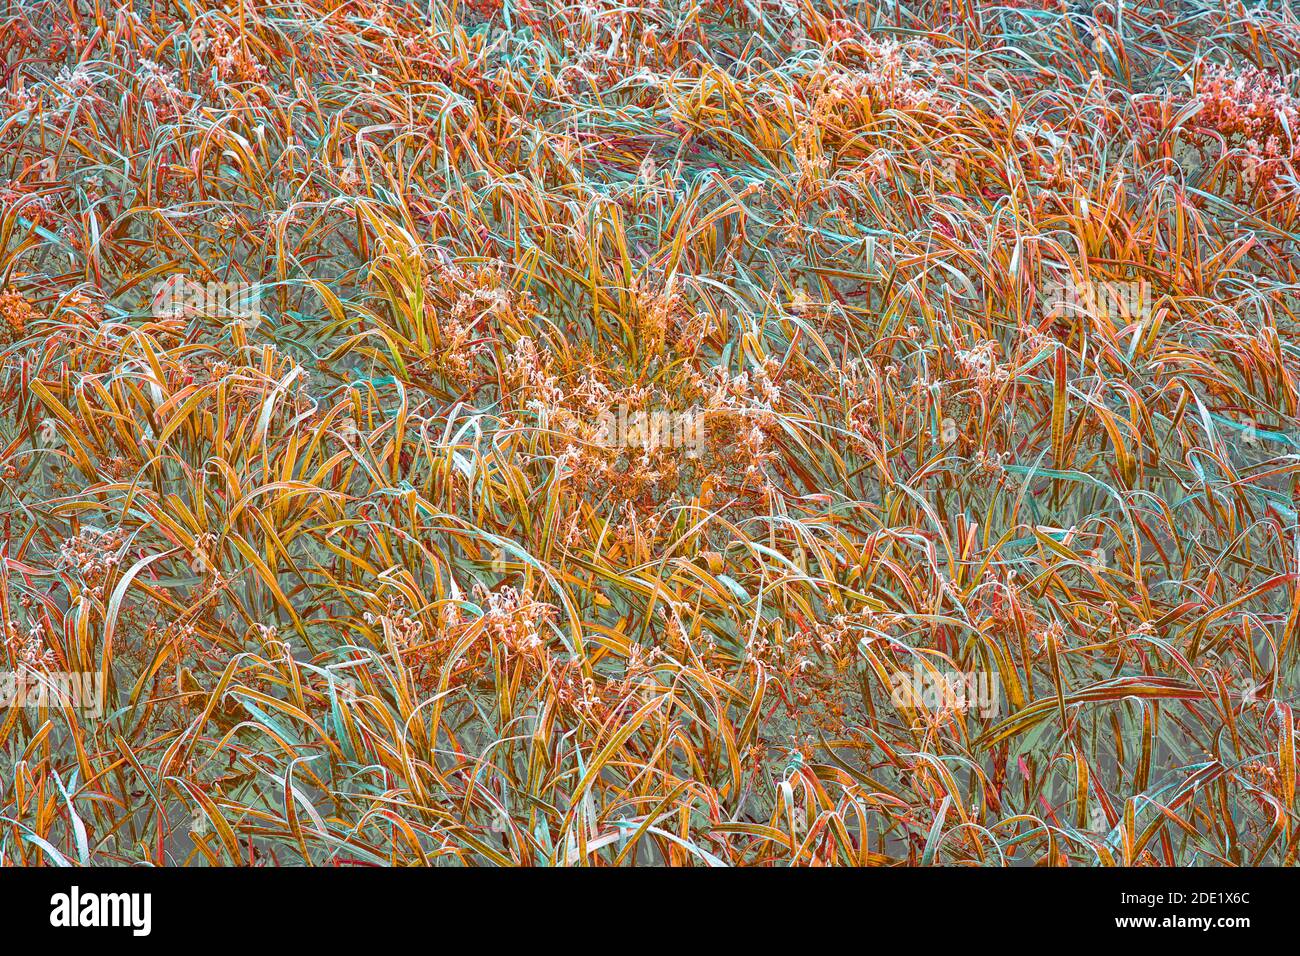 Field of coloured grass Stock Photo